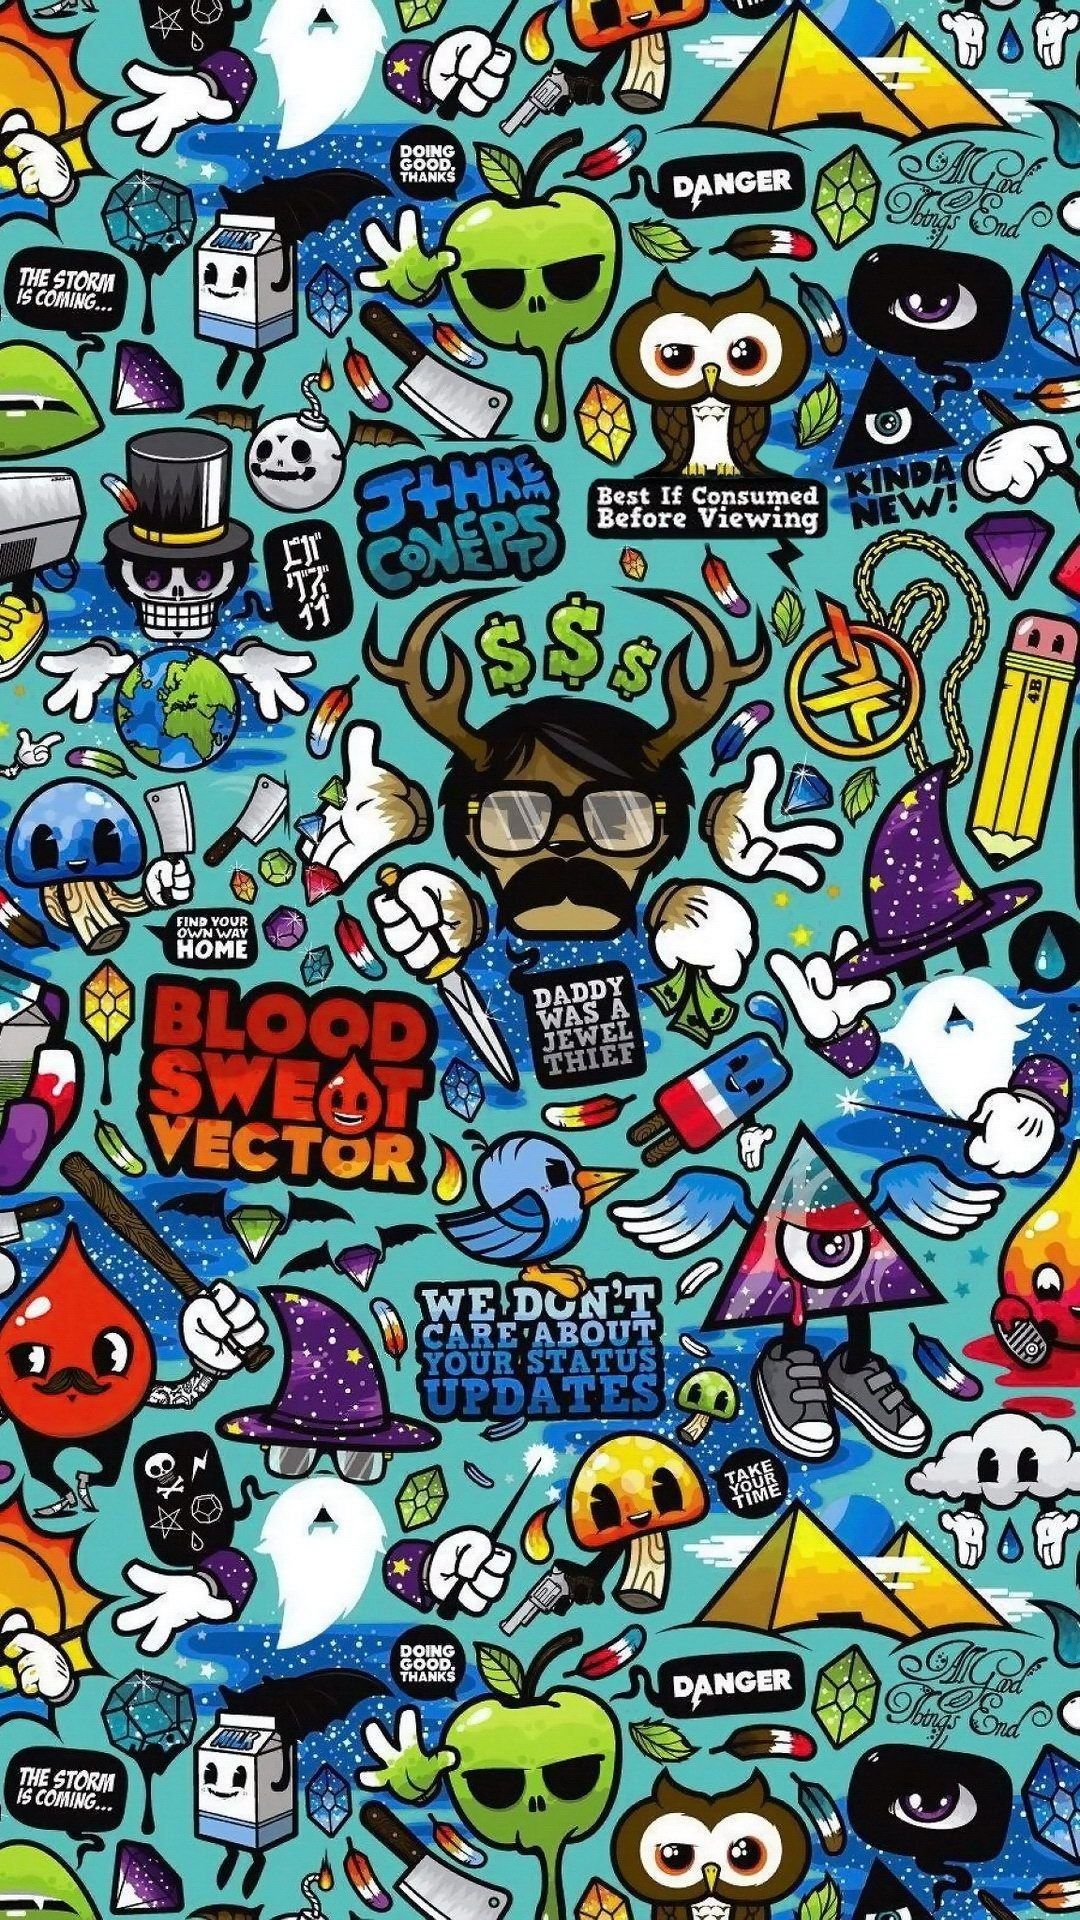 Iphone wallpaper with many stickers on it - Doodles